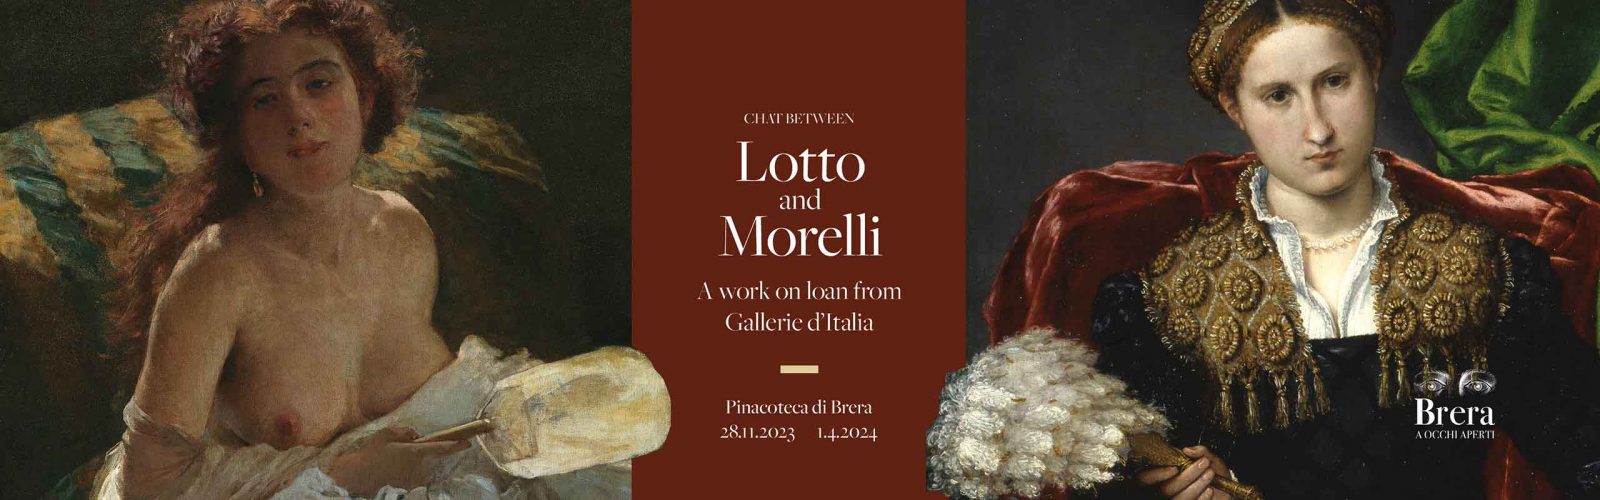 Chat between…<br>Lotto and Morelli